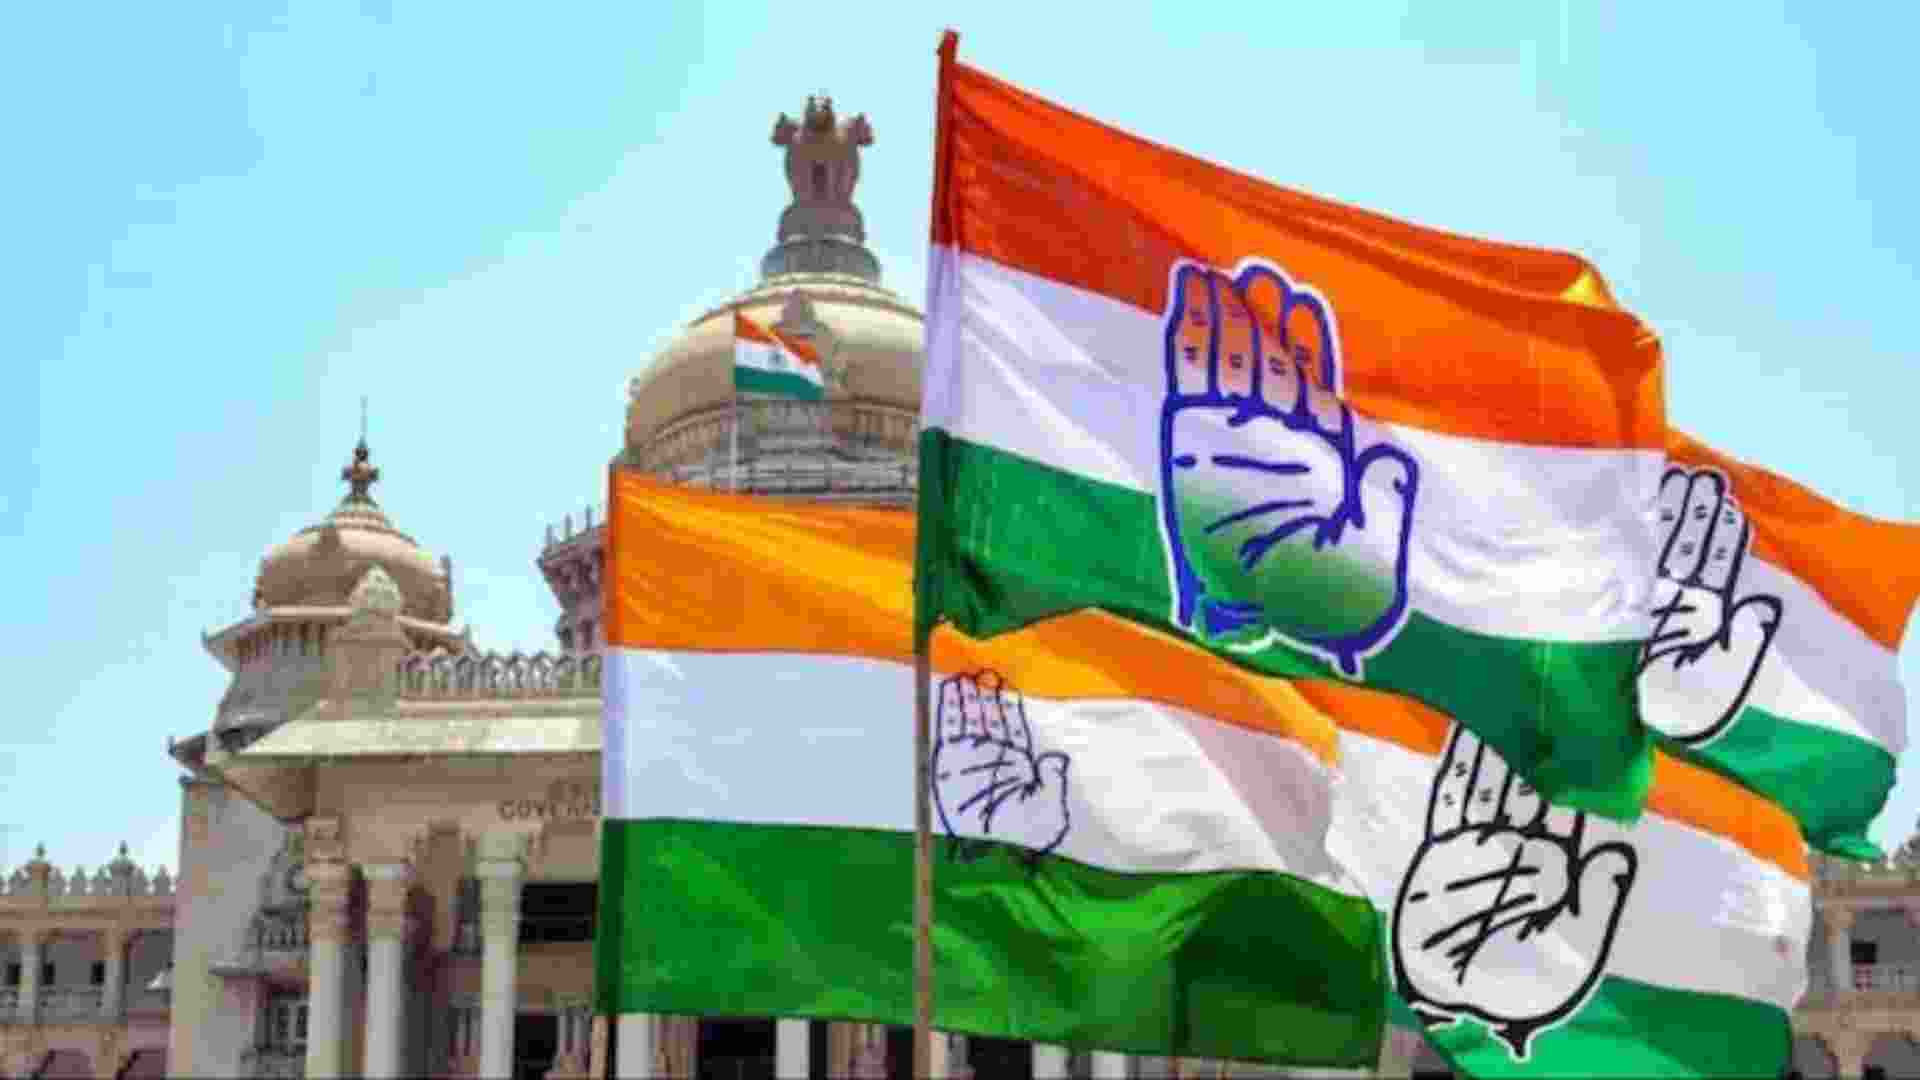  Congress under pressure to address Brahmin Community grievances ahead of elections in Rajasthan